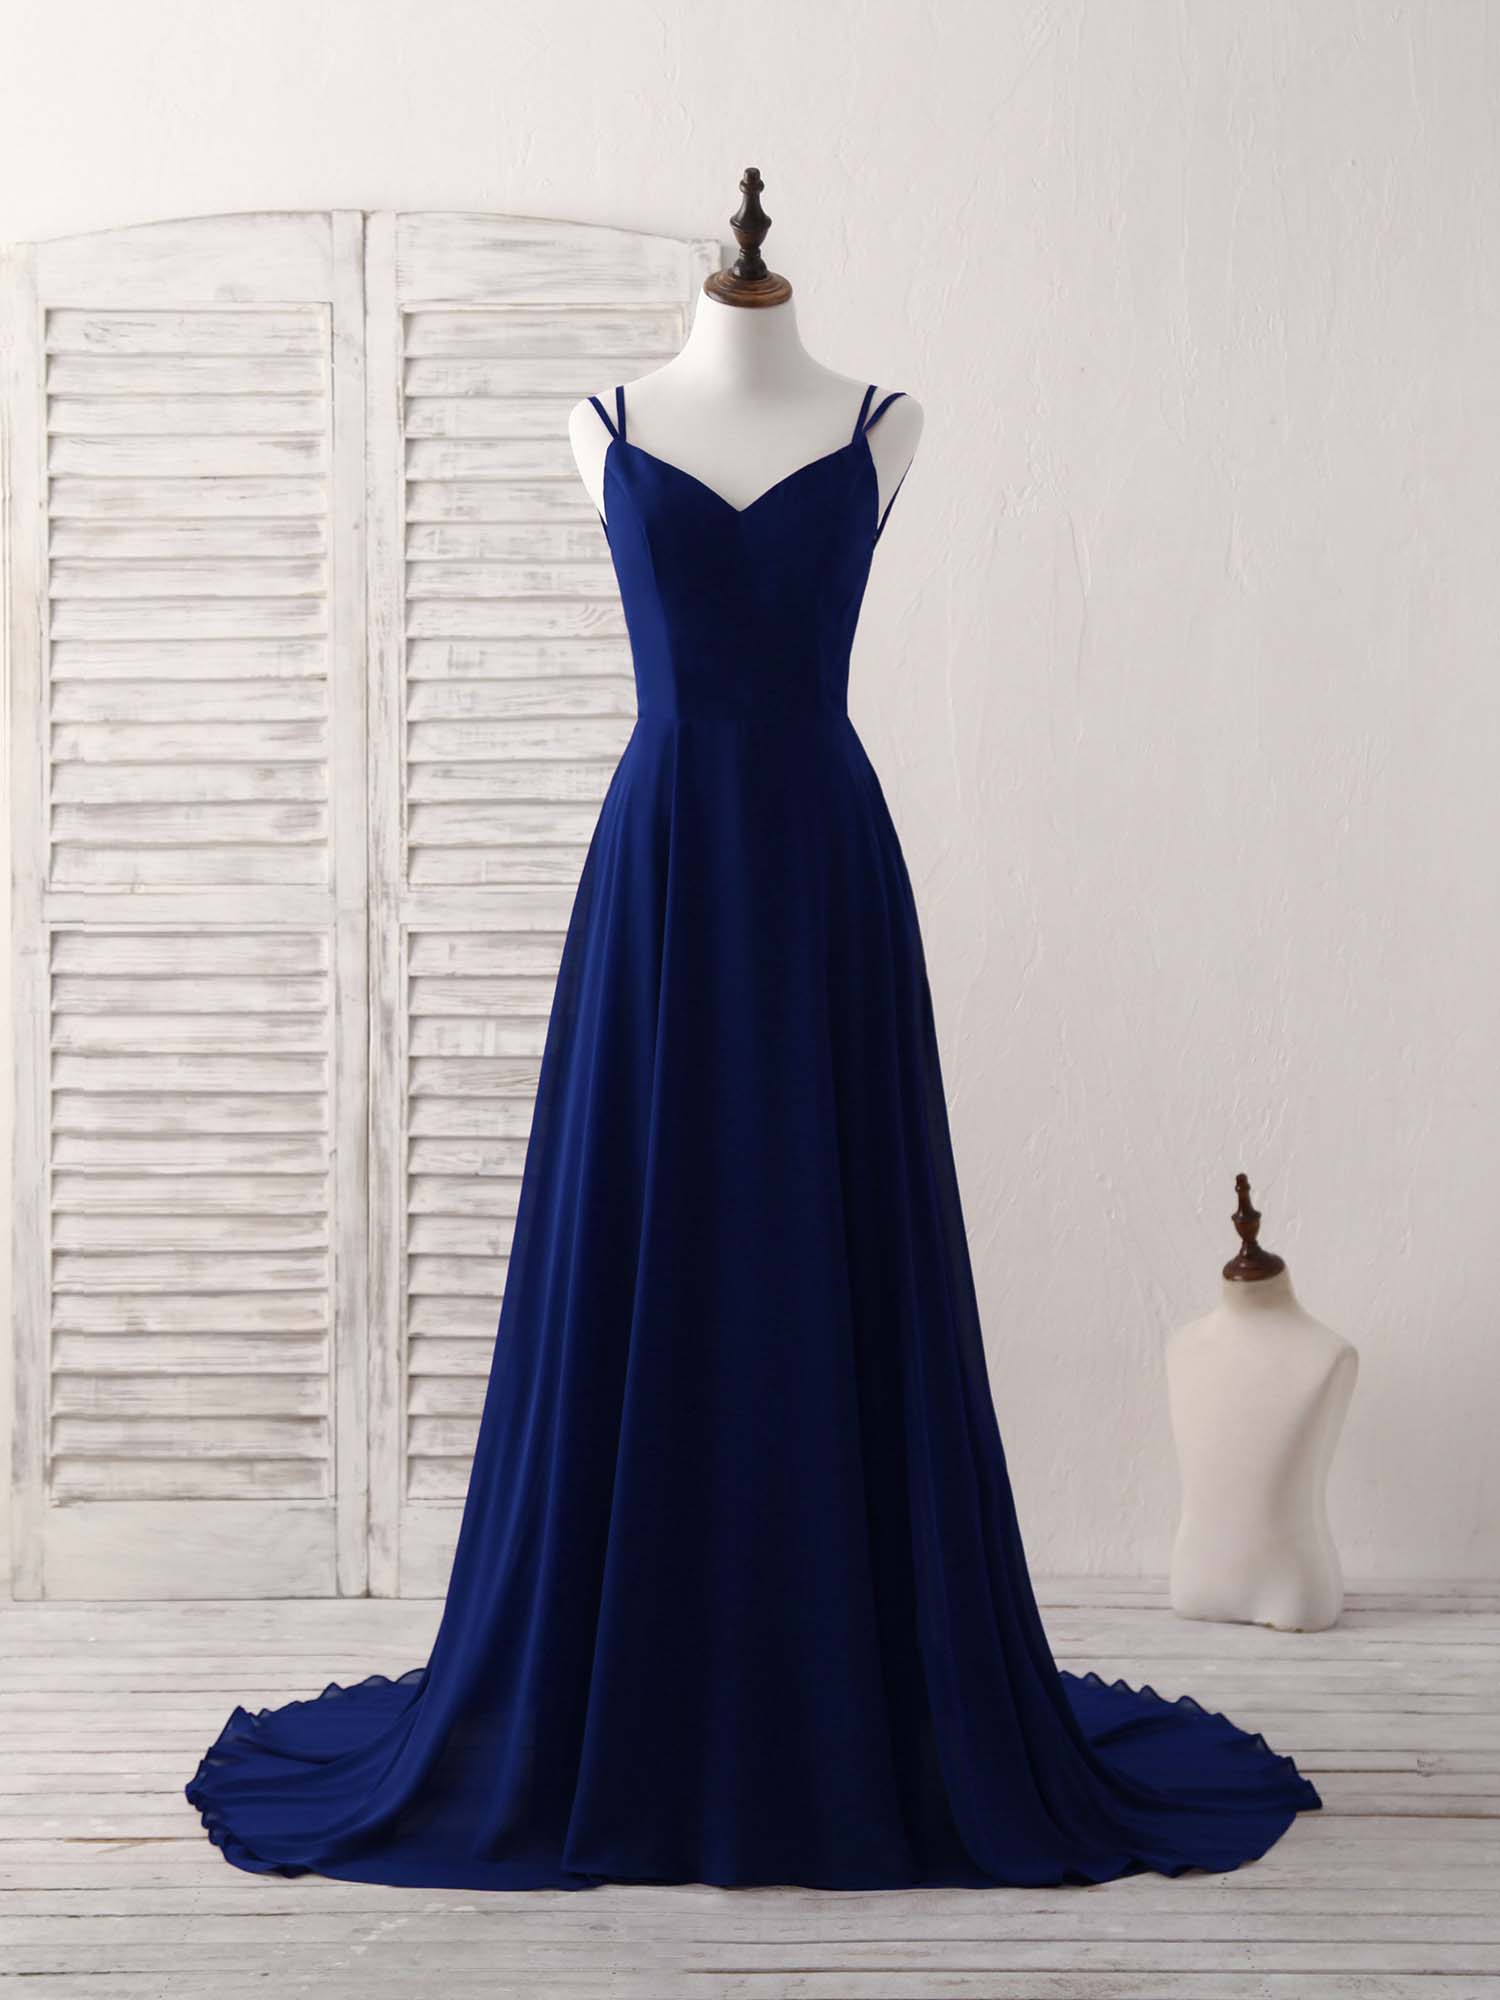 Simple Blue Chiffon Long Prom Dress Outfits For Women Backless Blue Evening Dress